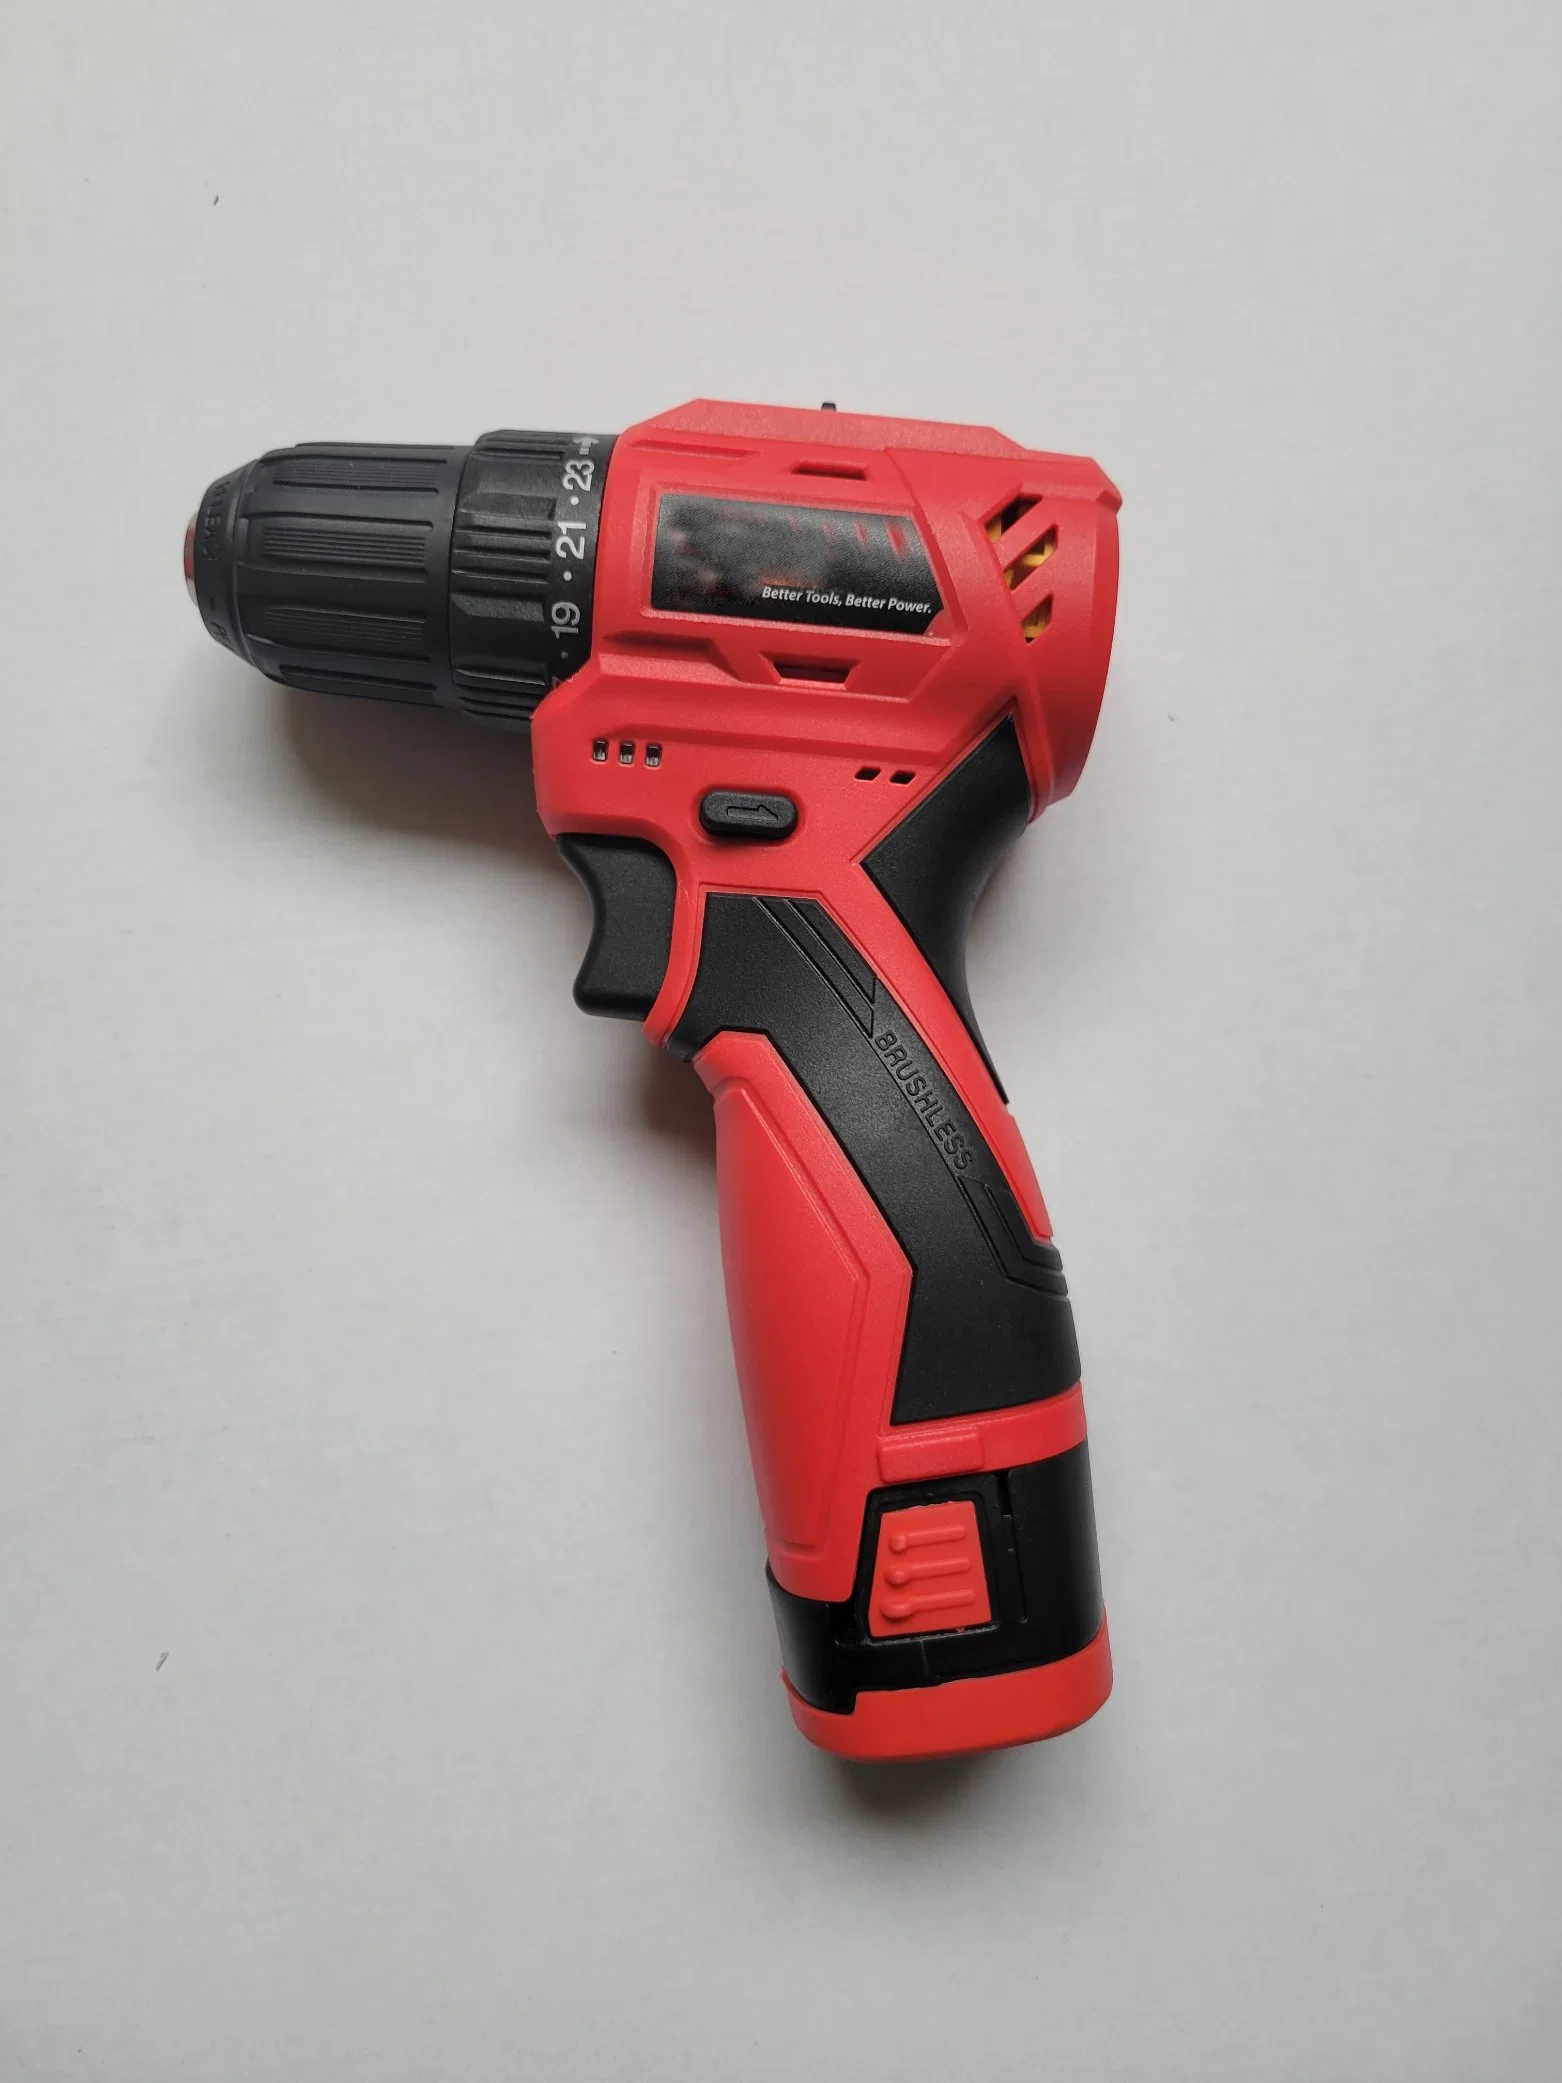 Electric Drill, Power Tool, Cordless Drill